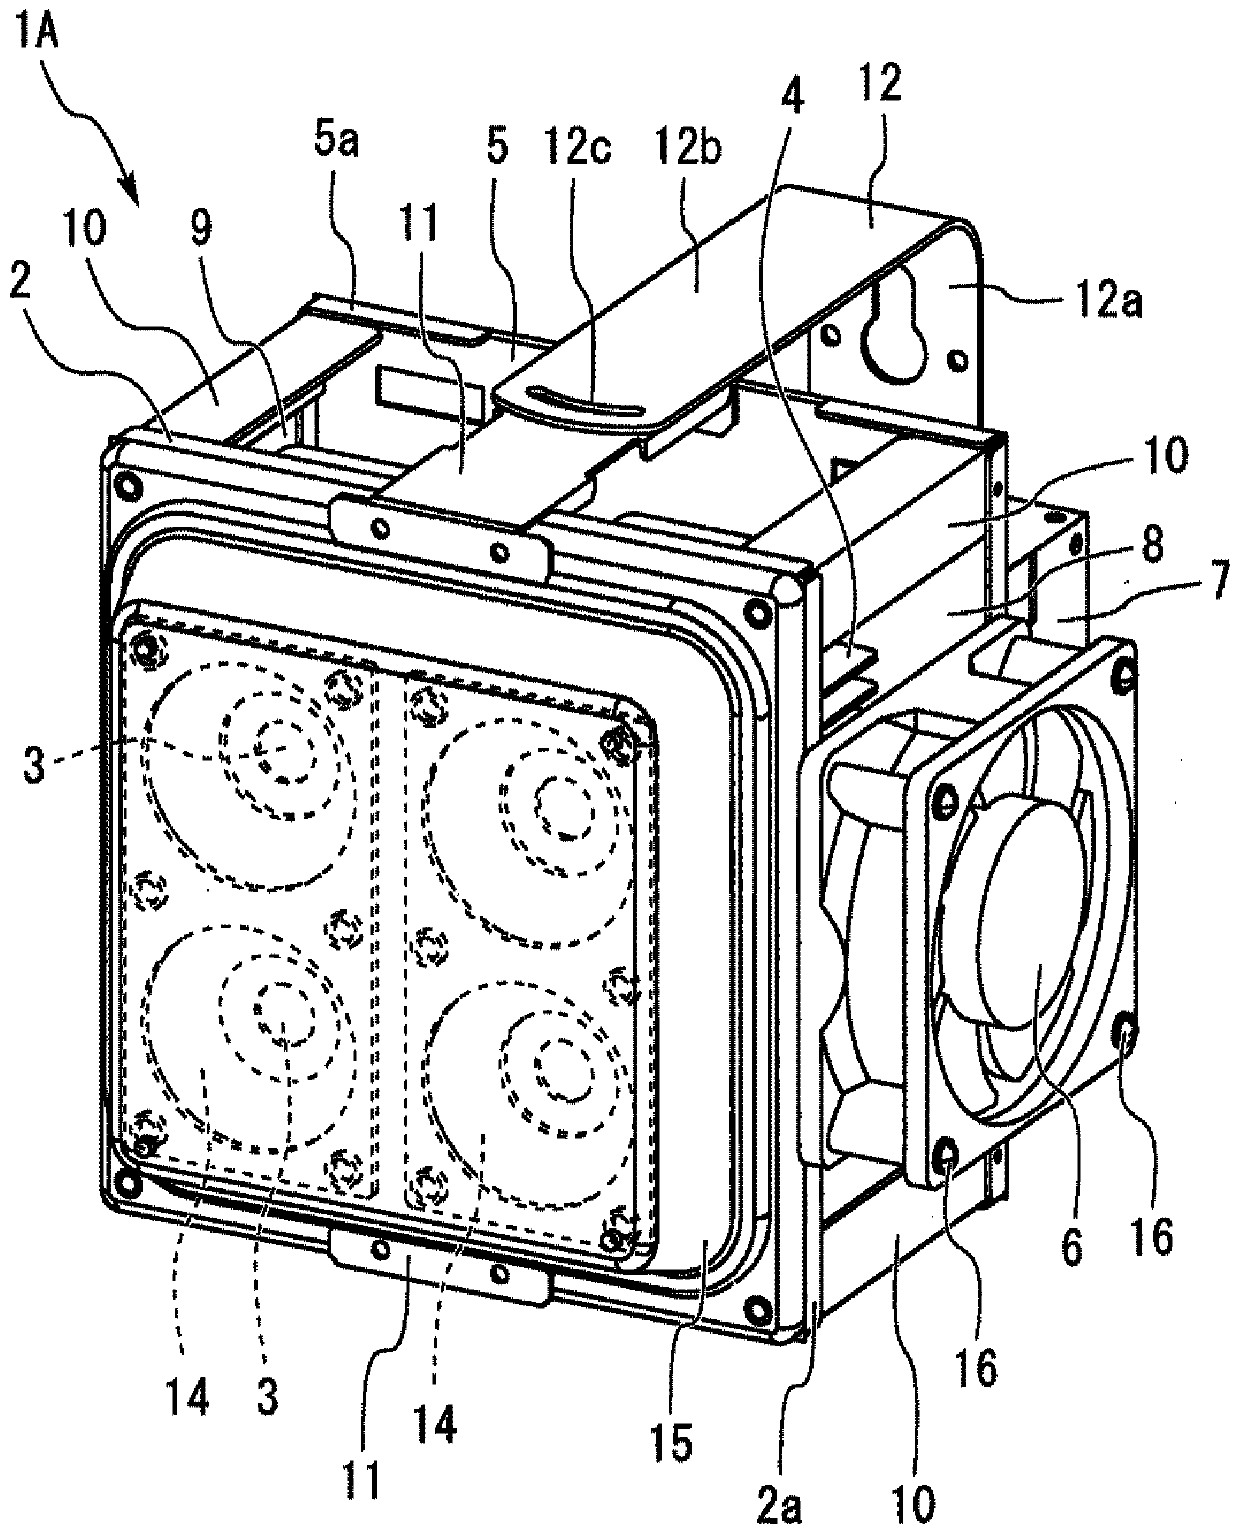 Lighting device and linked lighting device